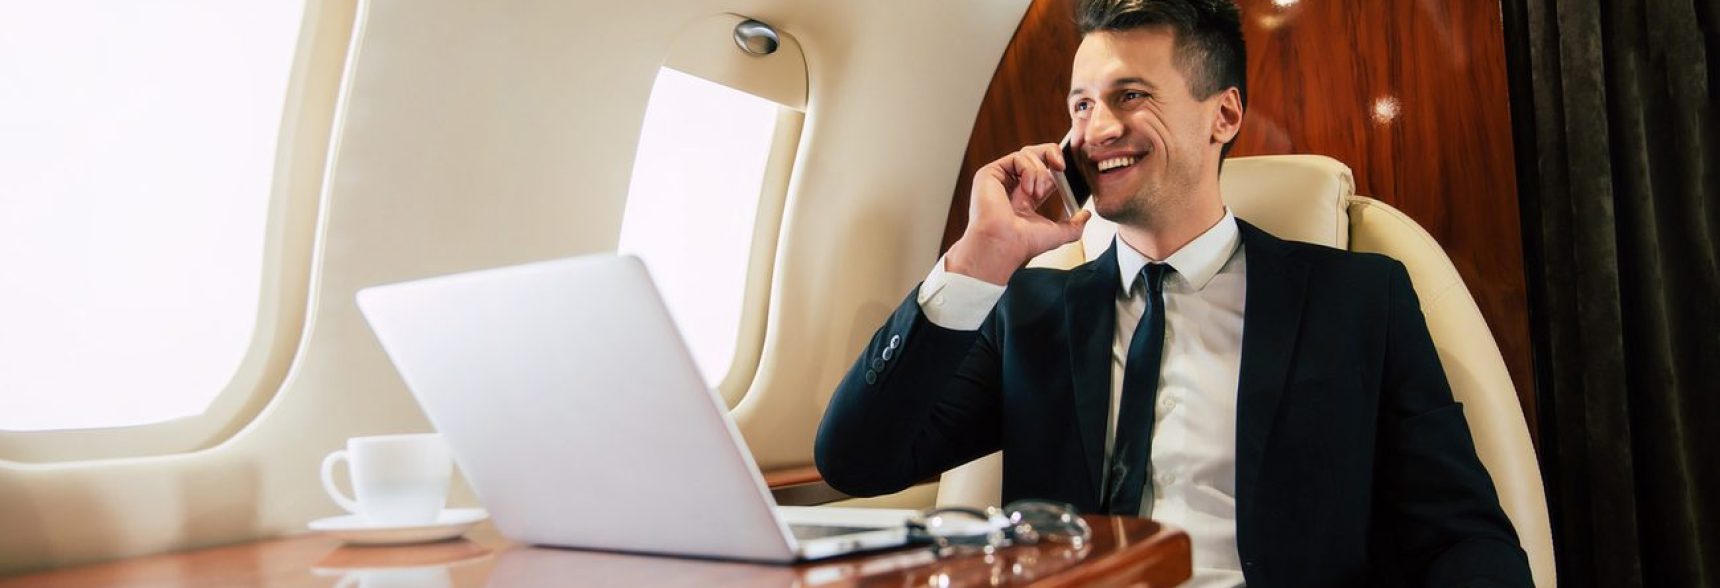 Handsome man in a suit is smiling and looking through the window while talking on the phone, flying business class with a laptop and a cup of coffee on it.